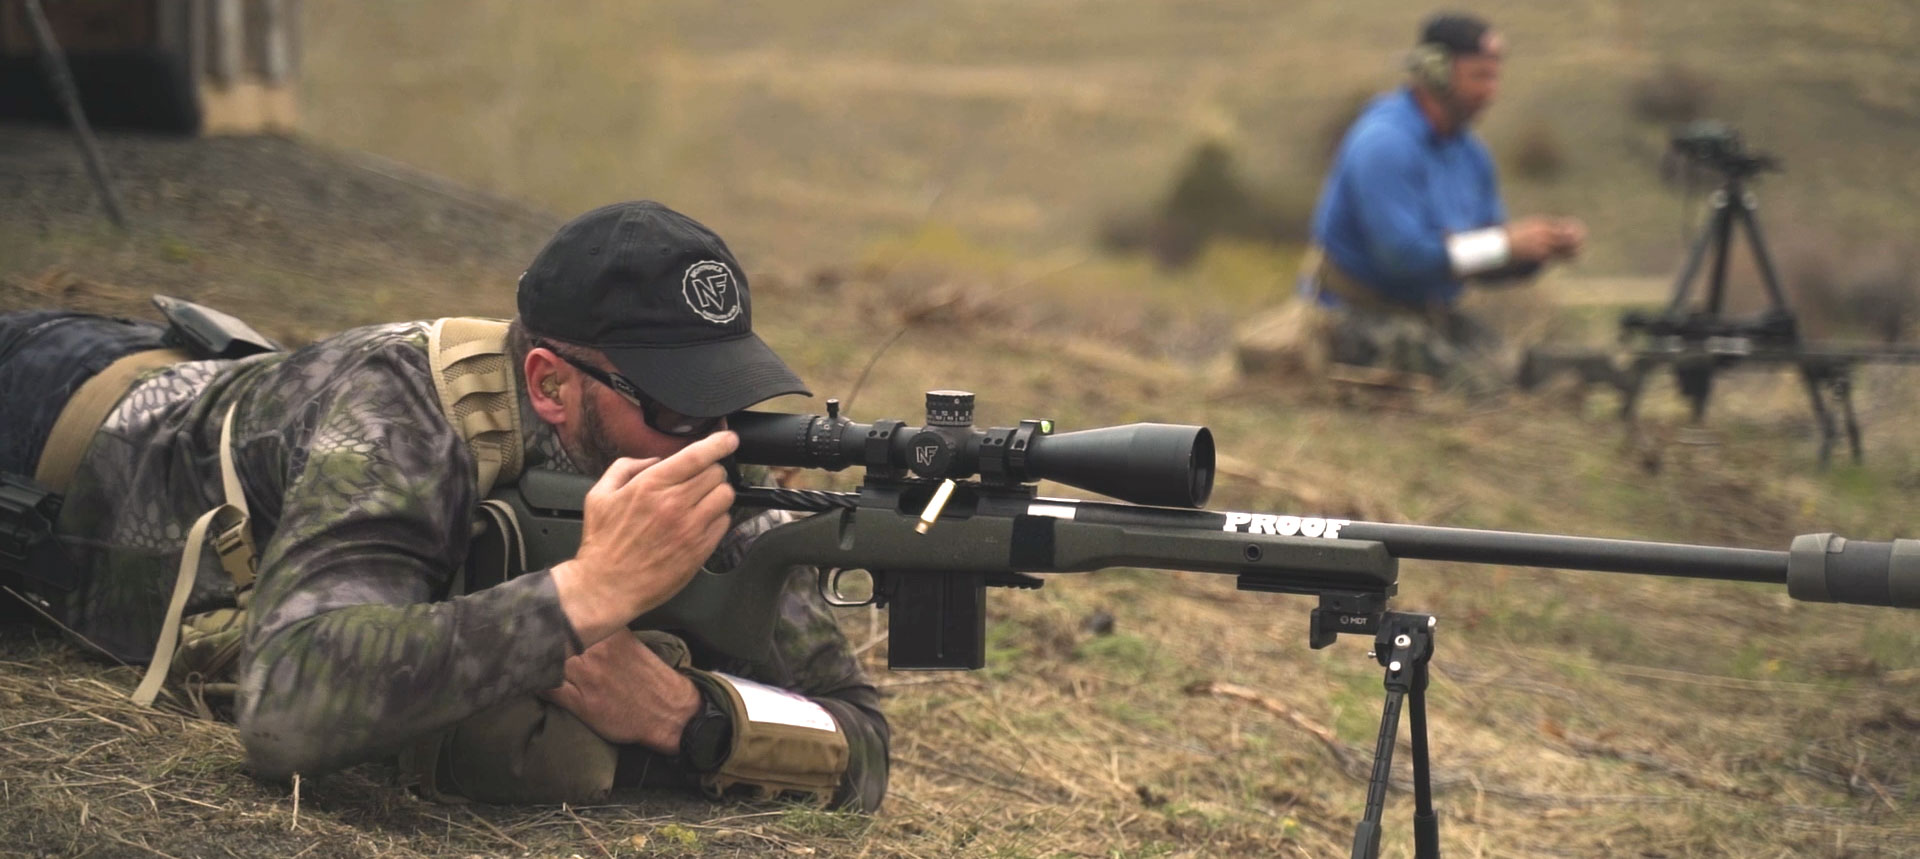 Shooter running a Proof Research rifle during a team sniper competition drill